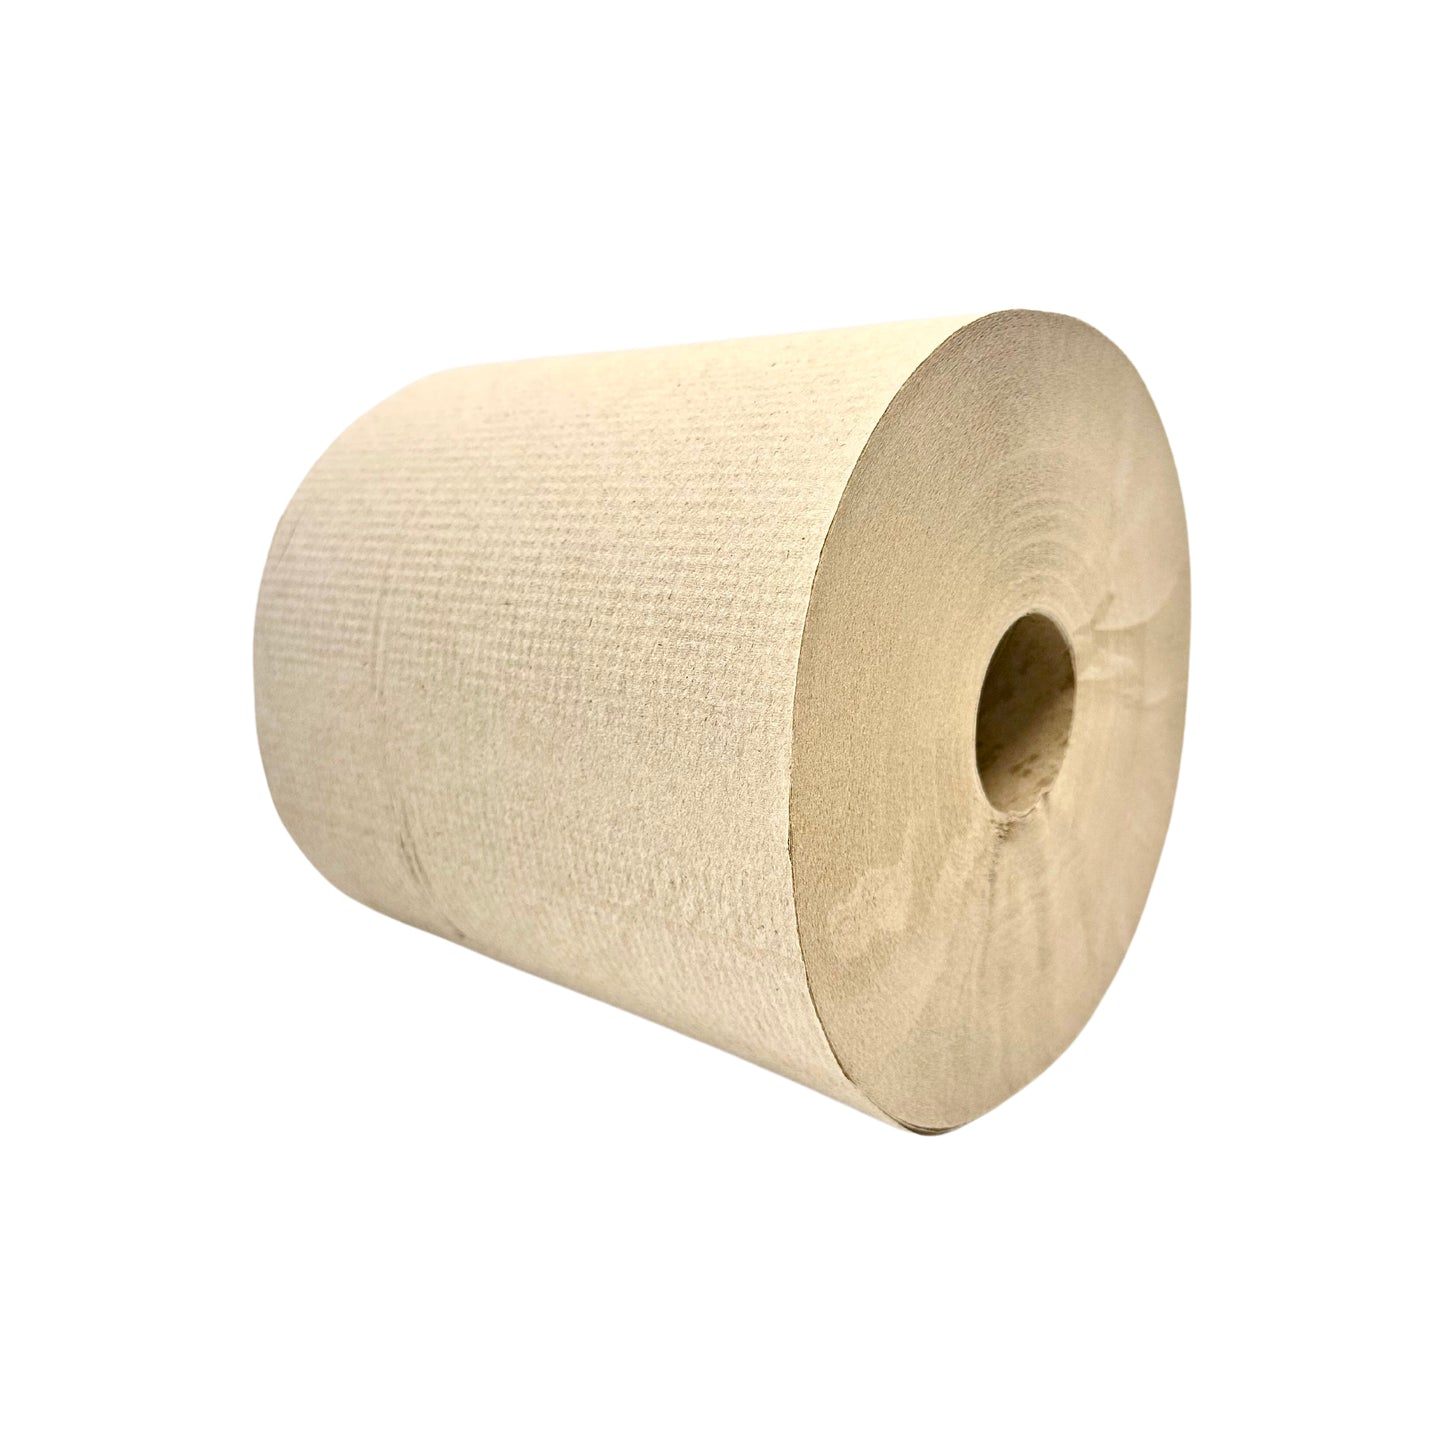 KIS-HT7858G | 6rolls Kraft Hand Towel 2 Ply, 7.85 inches x 800 ft; $4.99/pc